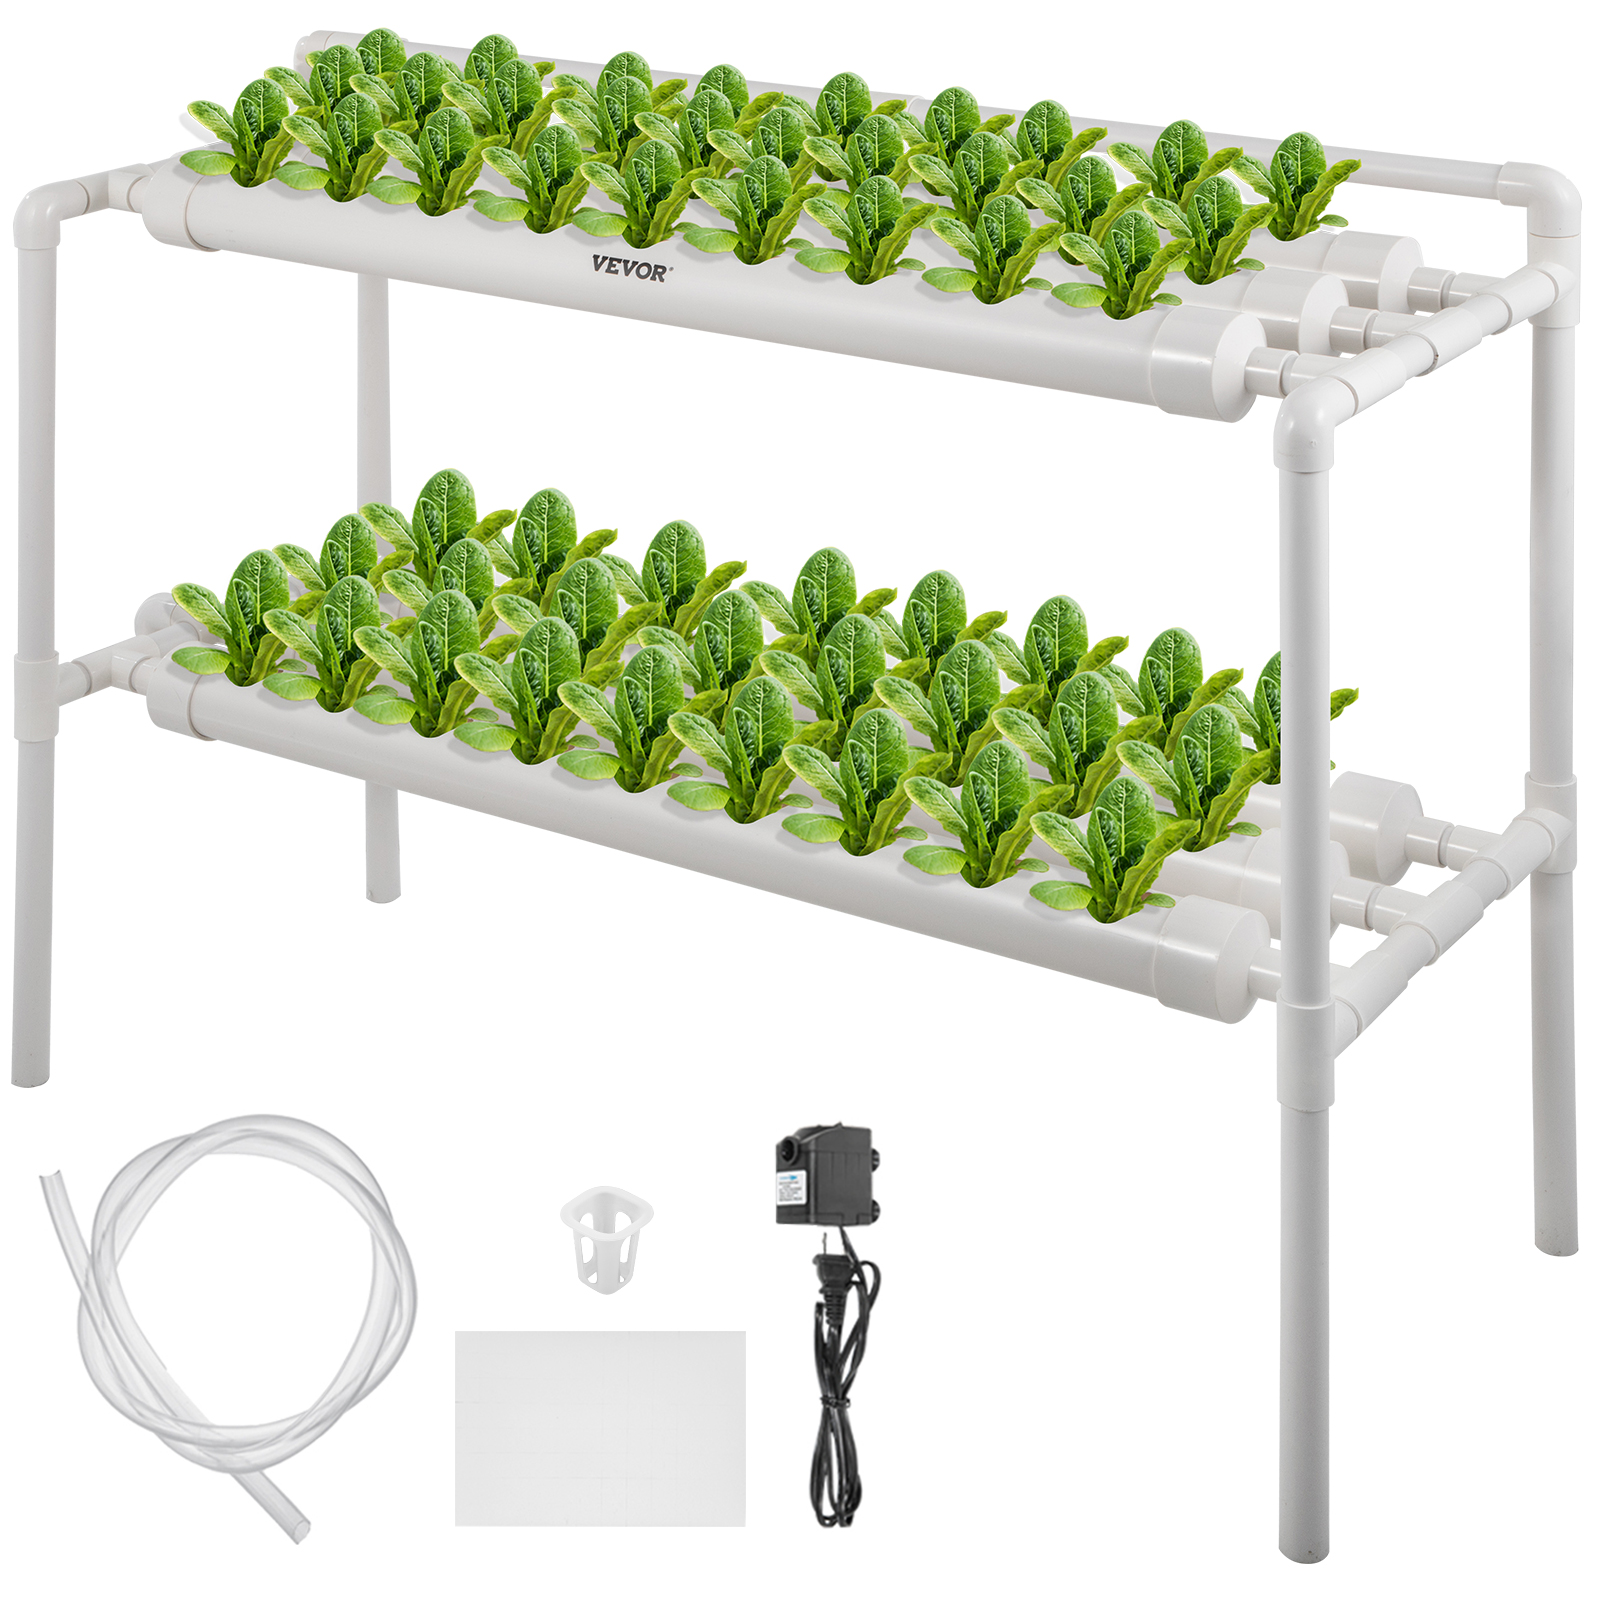 VEVOR 2 Layers 54 Plant Sites Hydroponic Site Grow Kit 6 Pipes Hydroponic Growing System Water Culture Garden Plant System for Leafy Vegetables Lettuce Herb Celery Cabbage